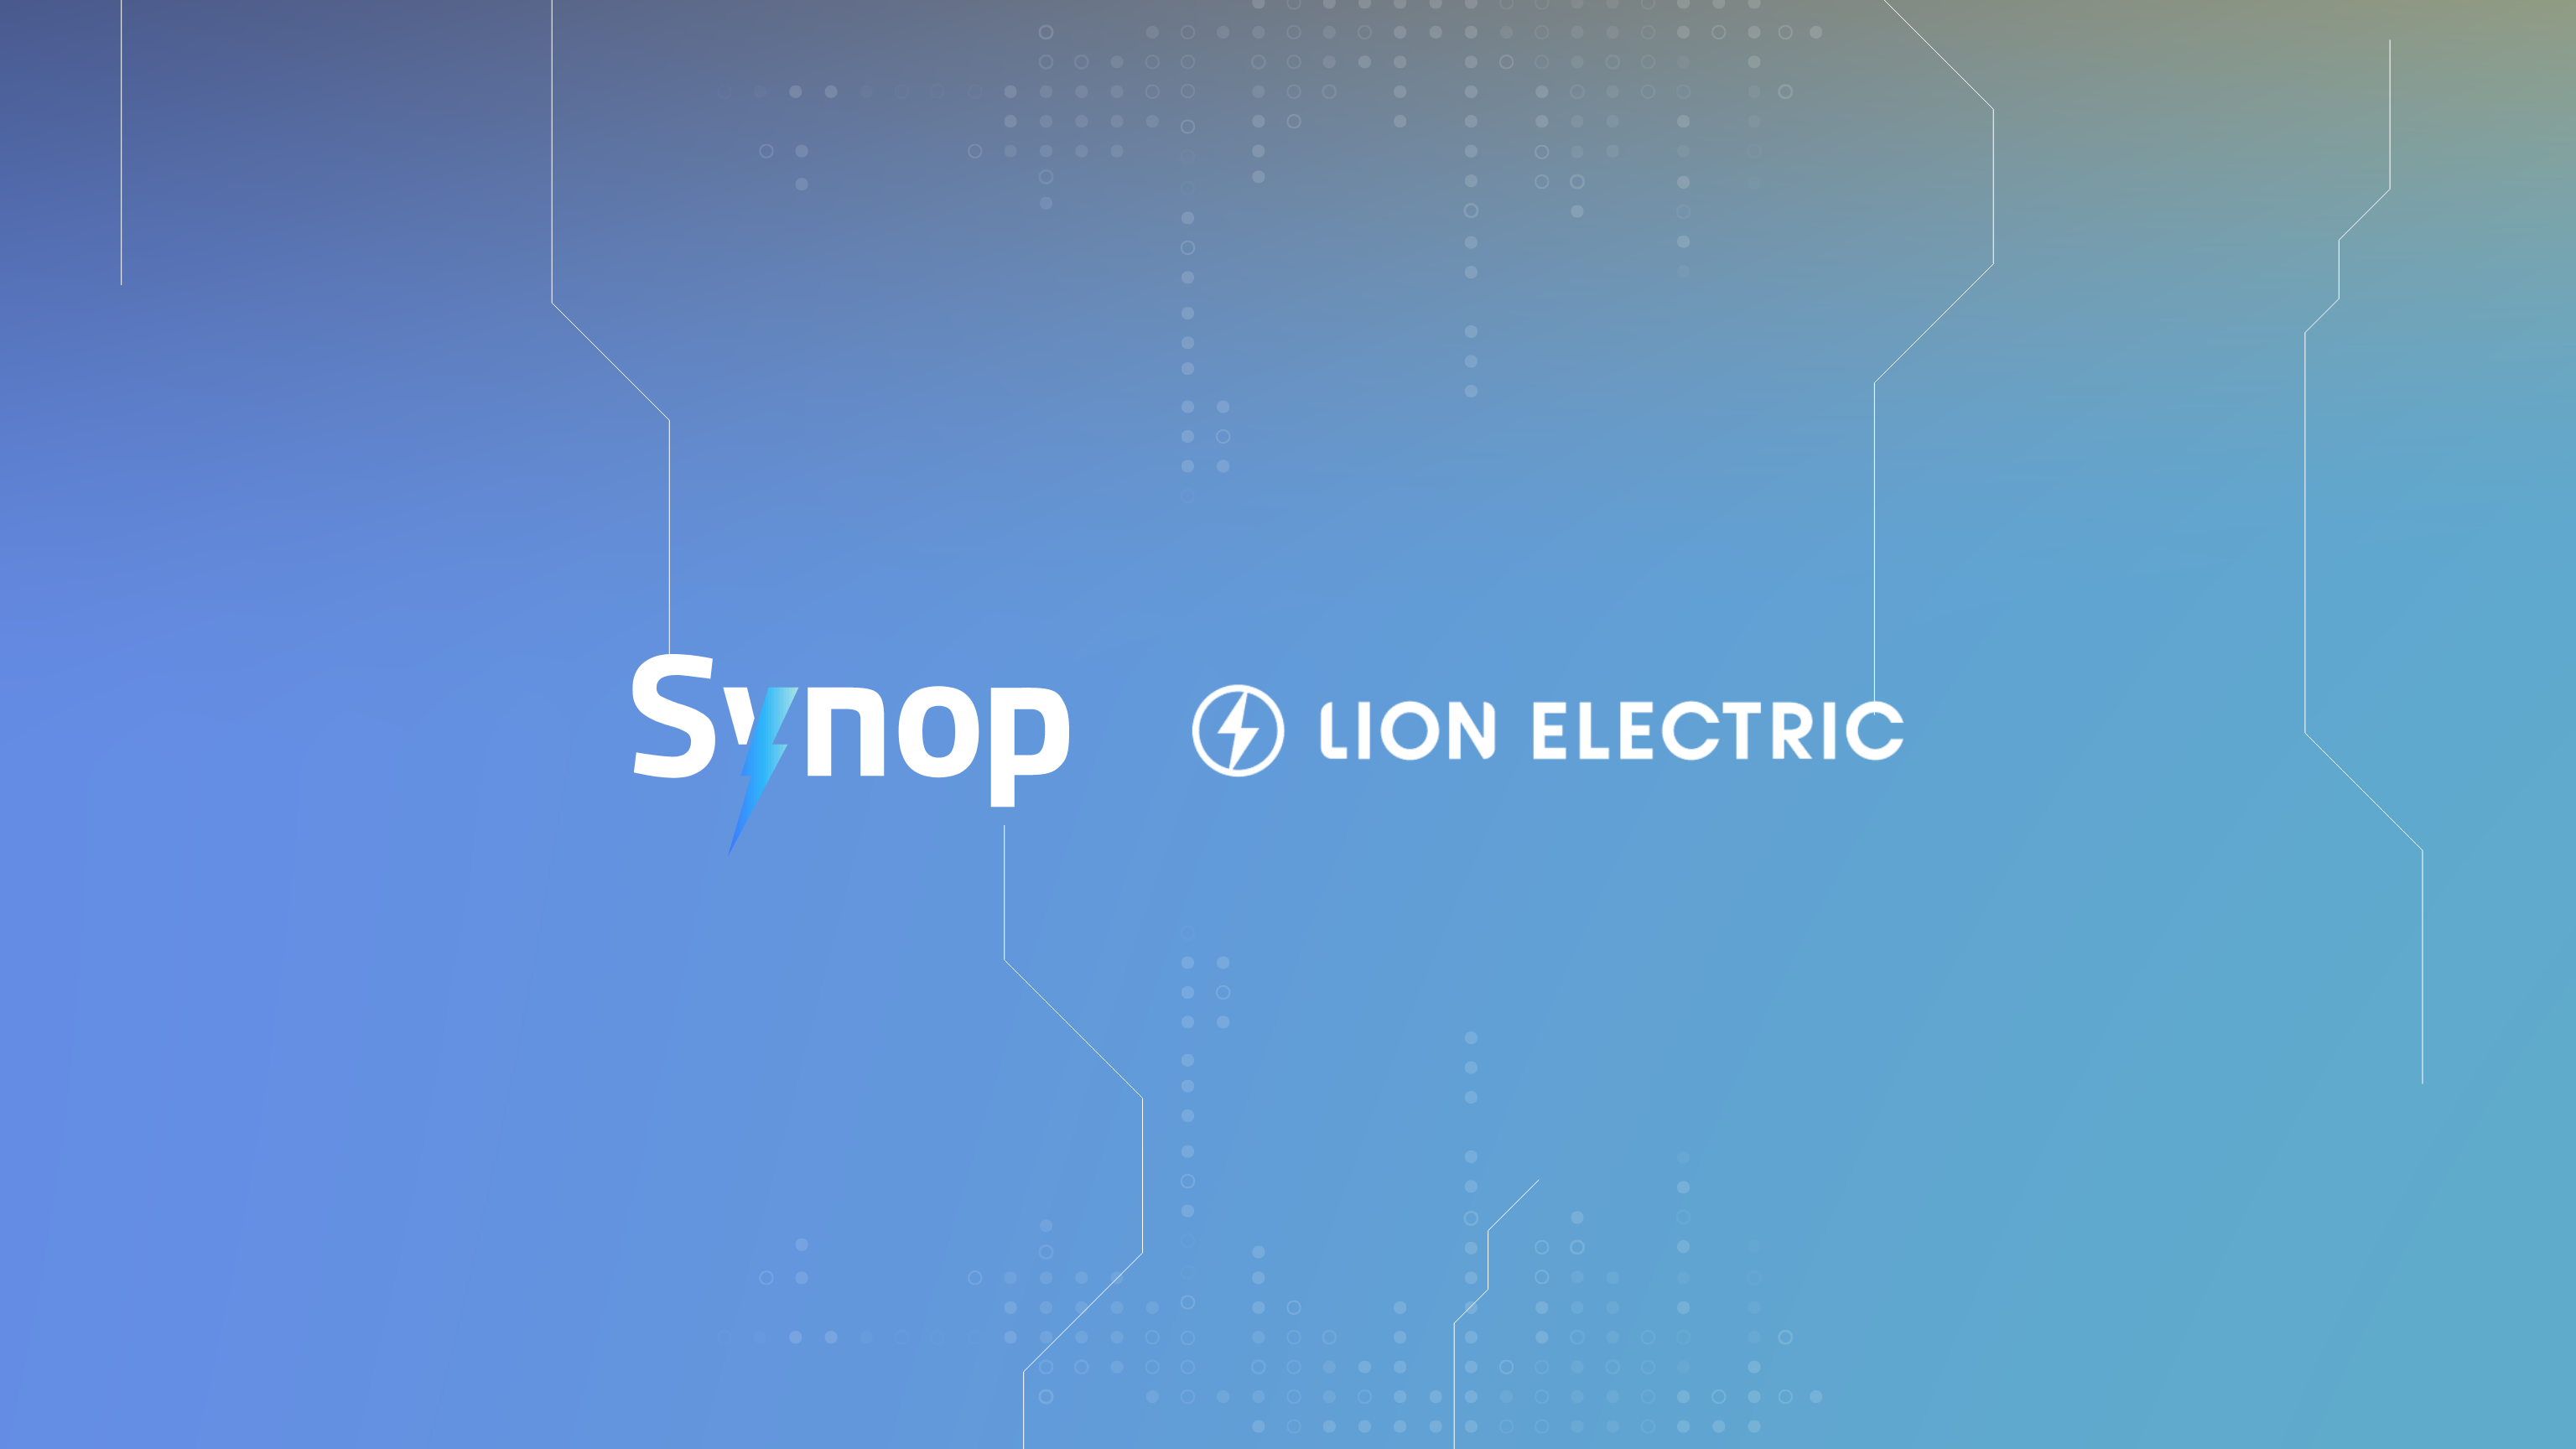 Synop & Lion electric team up for energy management software